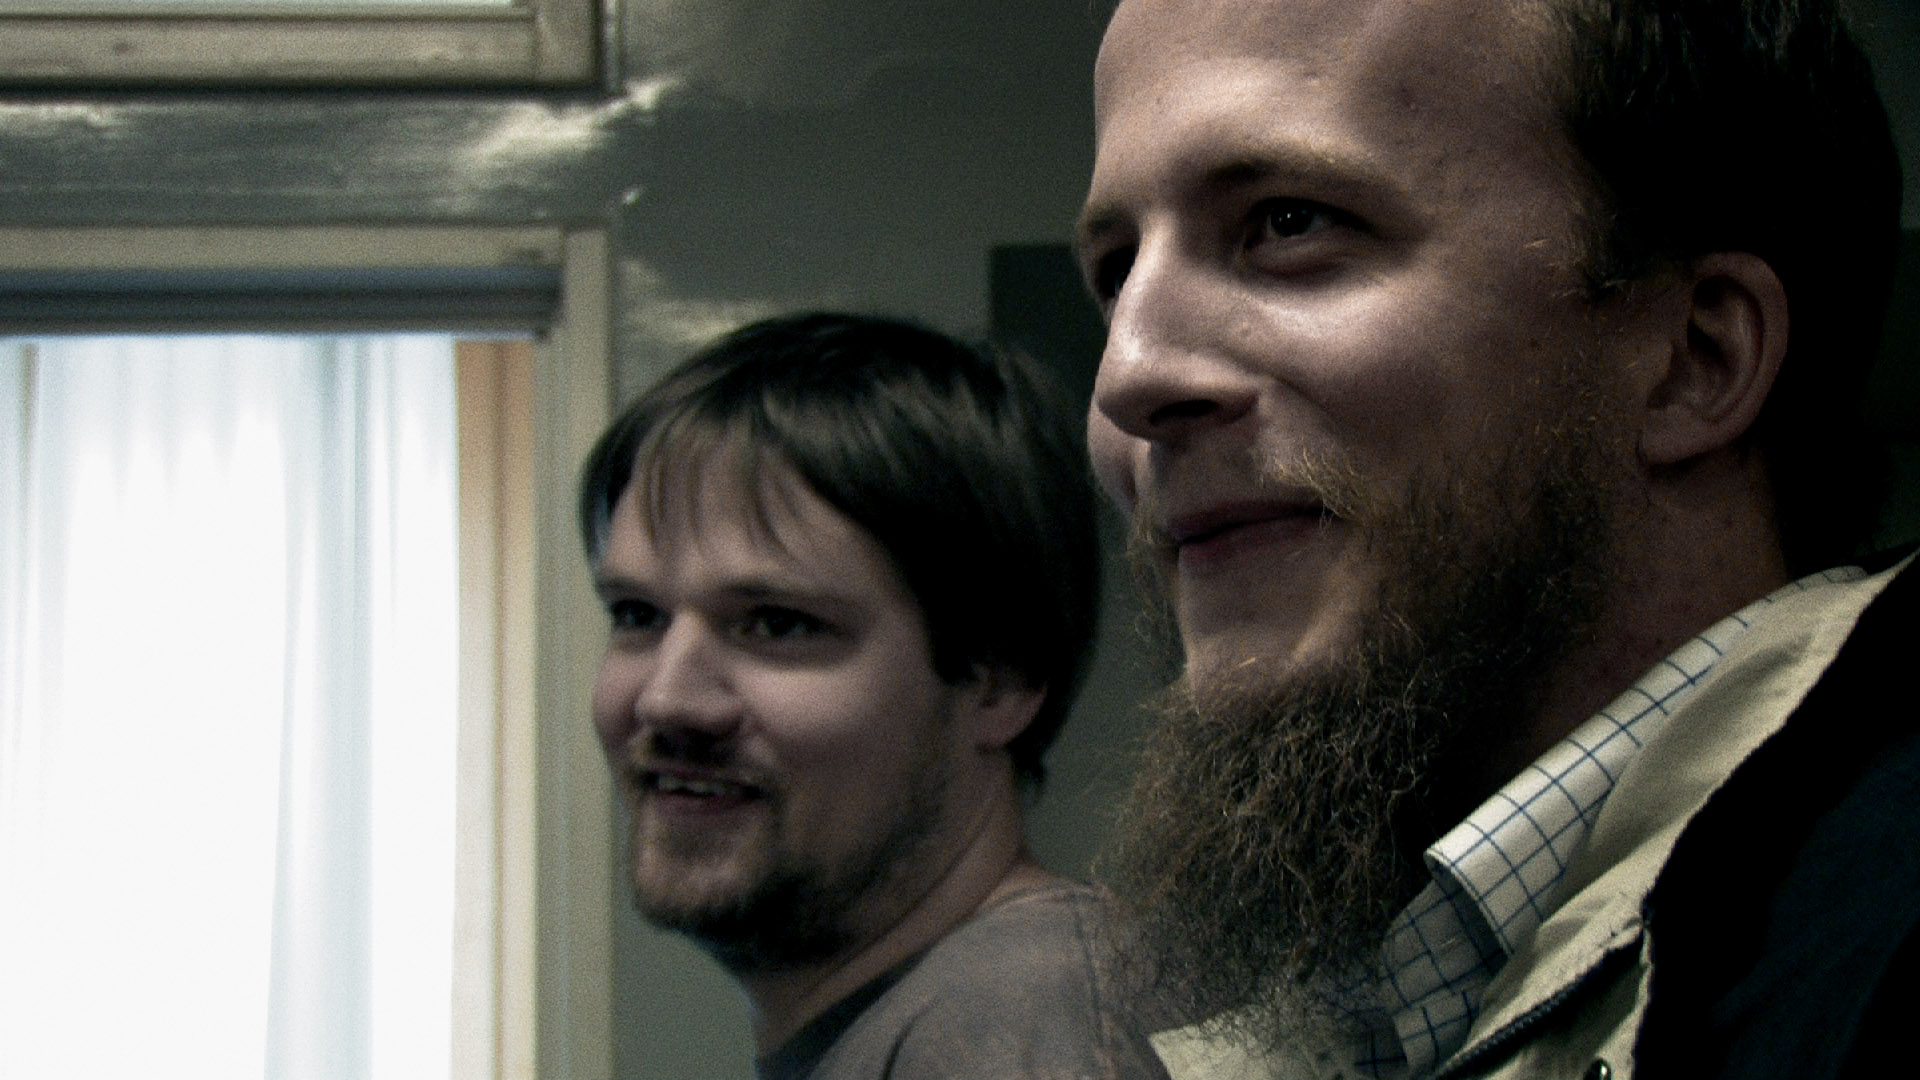 Watch Pirate Bay Documentary TPB AFK Here (Or on Pirate Bay, Naturally)